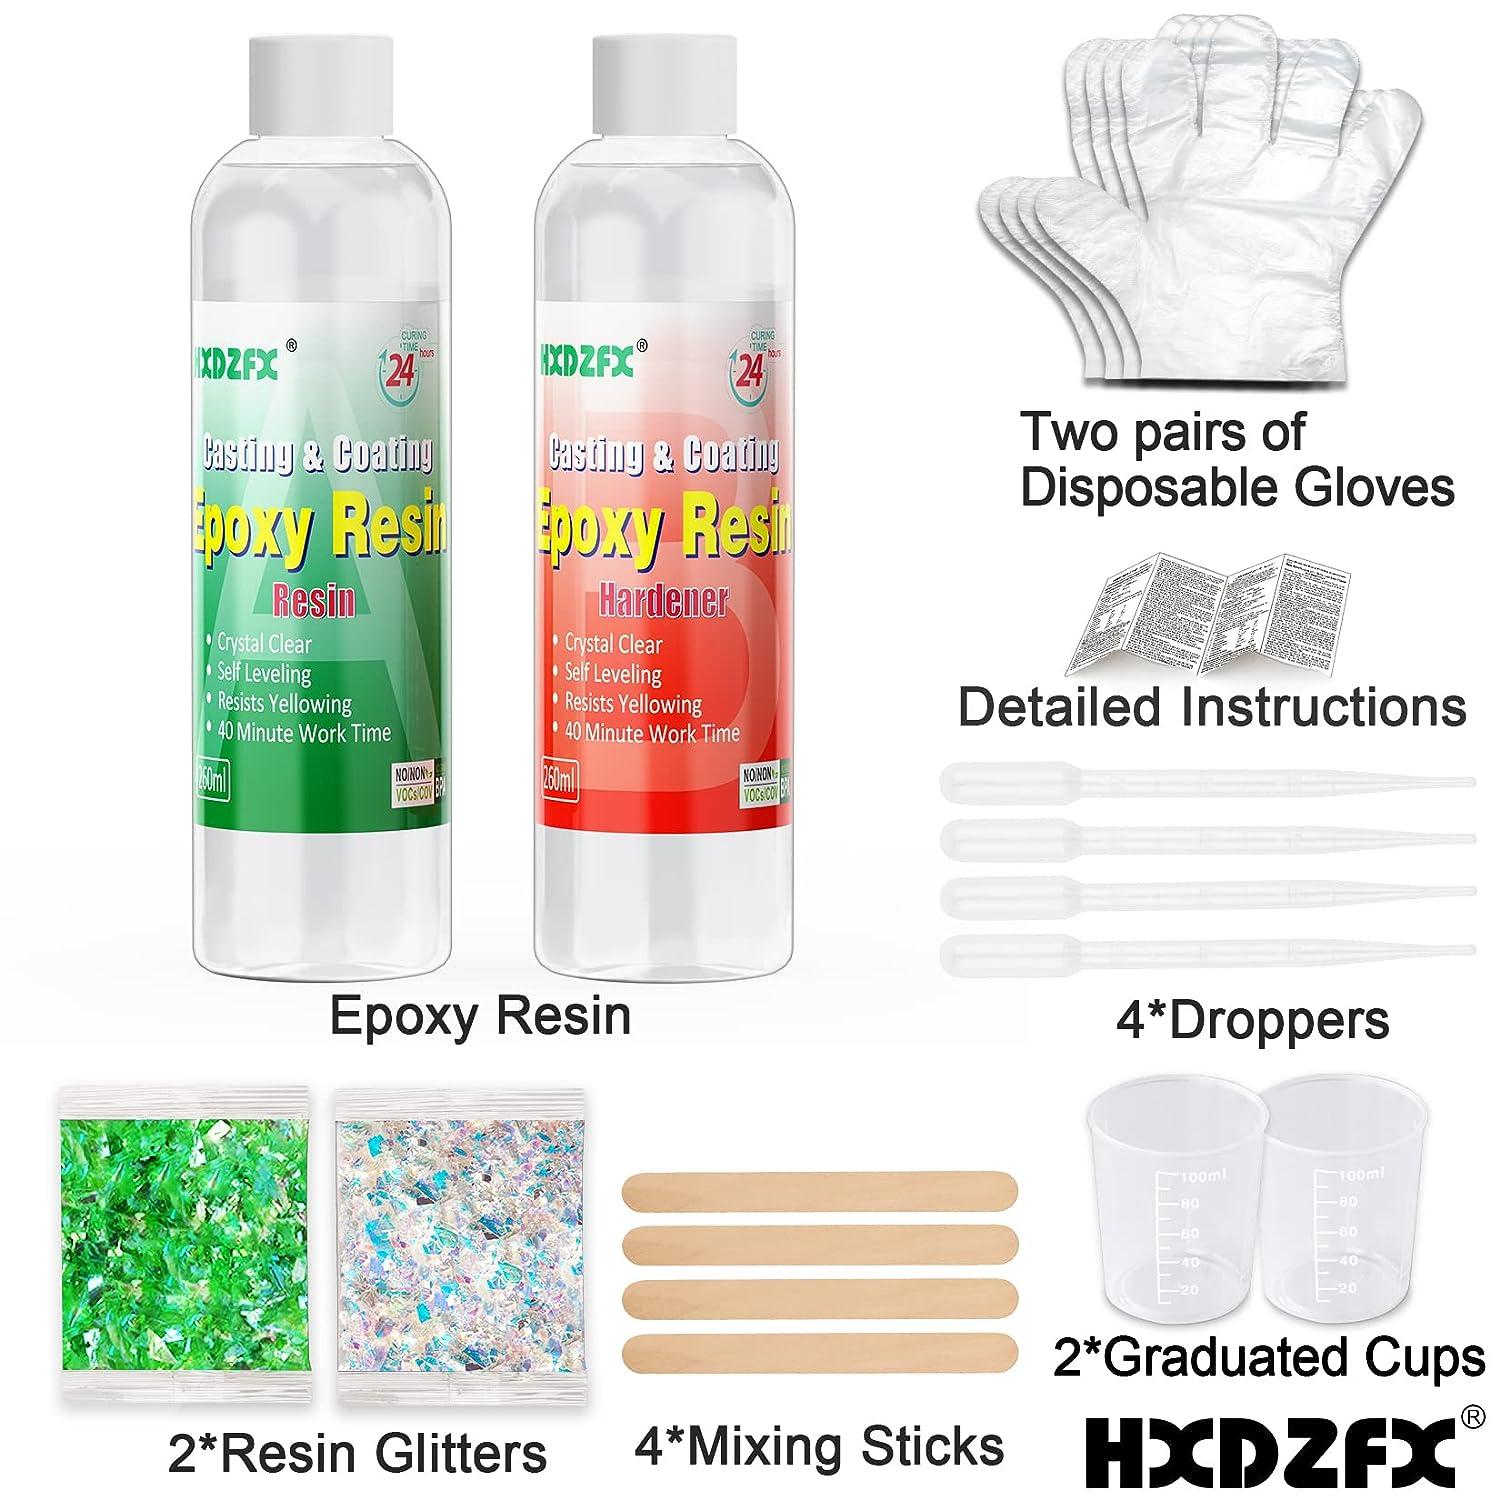 Epoxy Resin Kit for Beginners - 15.5 FL.OZ. Crystal Clear Casting and  Coating Epoxy Resin for Jewelry Making, Art, Crafts, Tumblers, River  Tables, UV